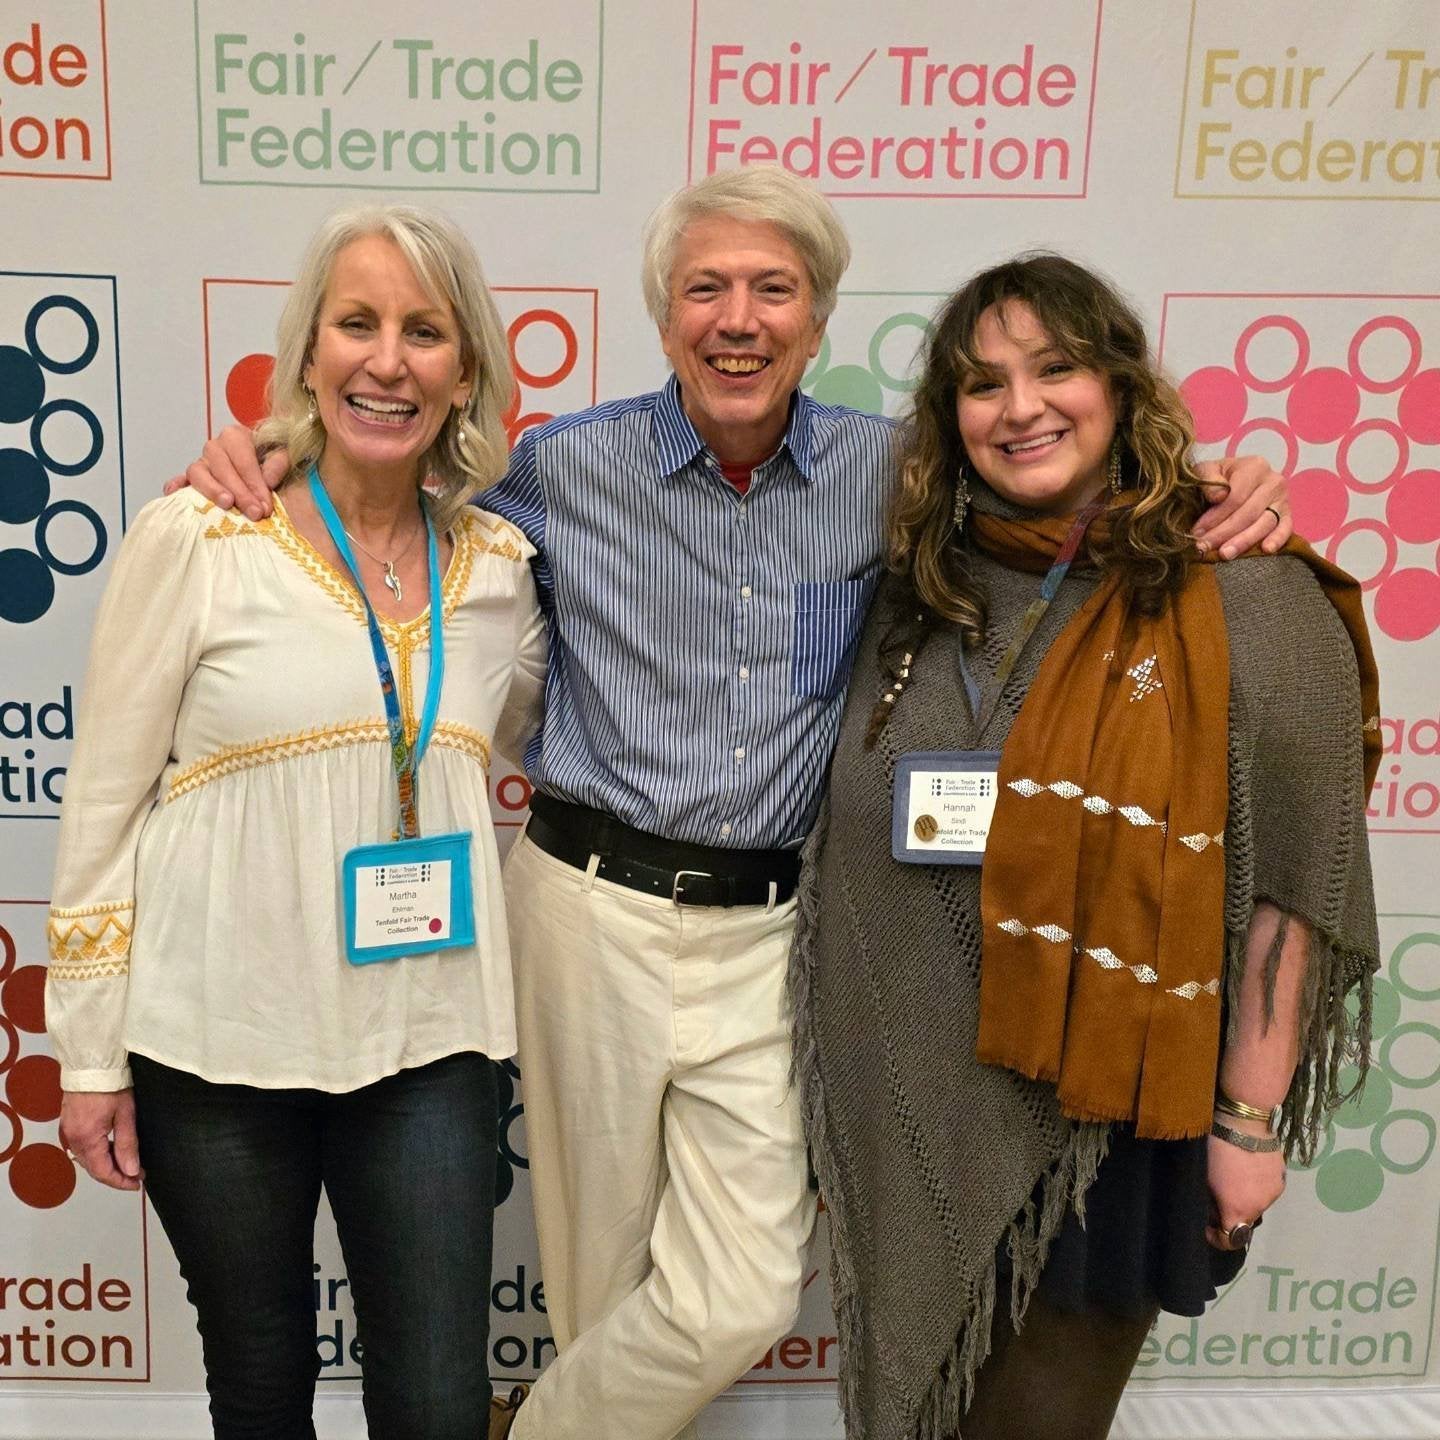 Reconnecting with fellow fair traders in Richmond